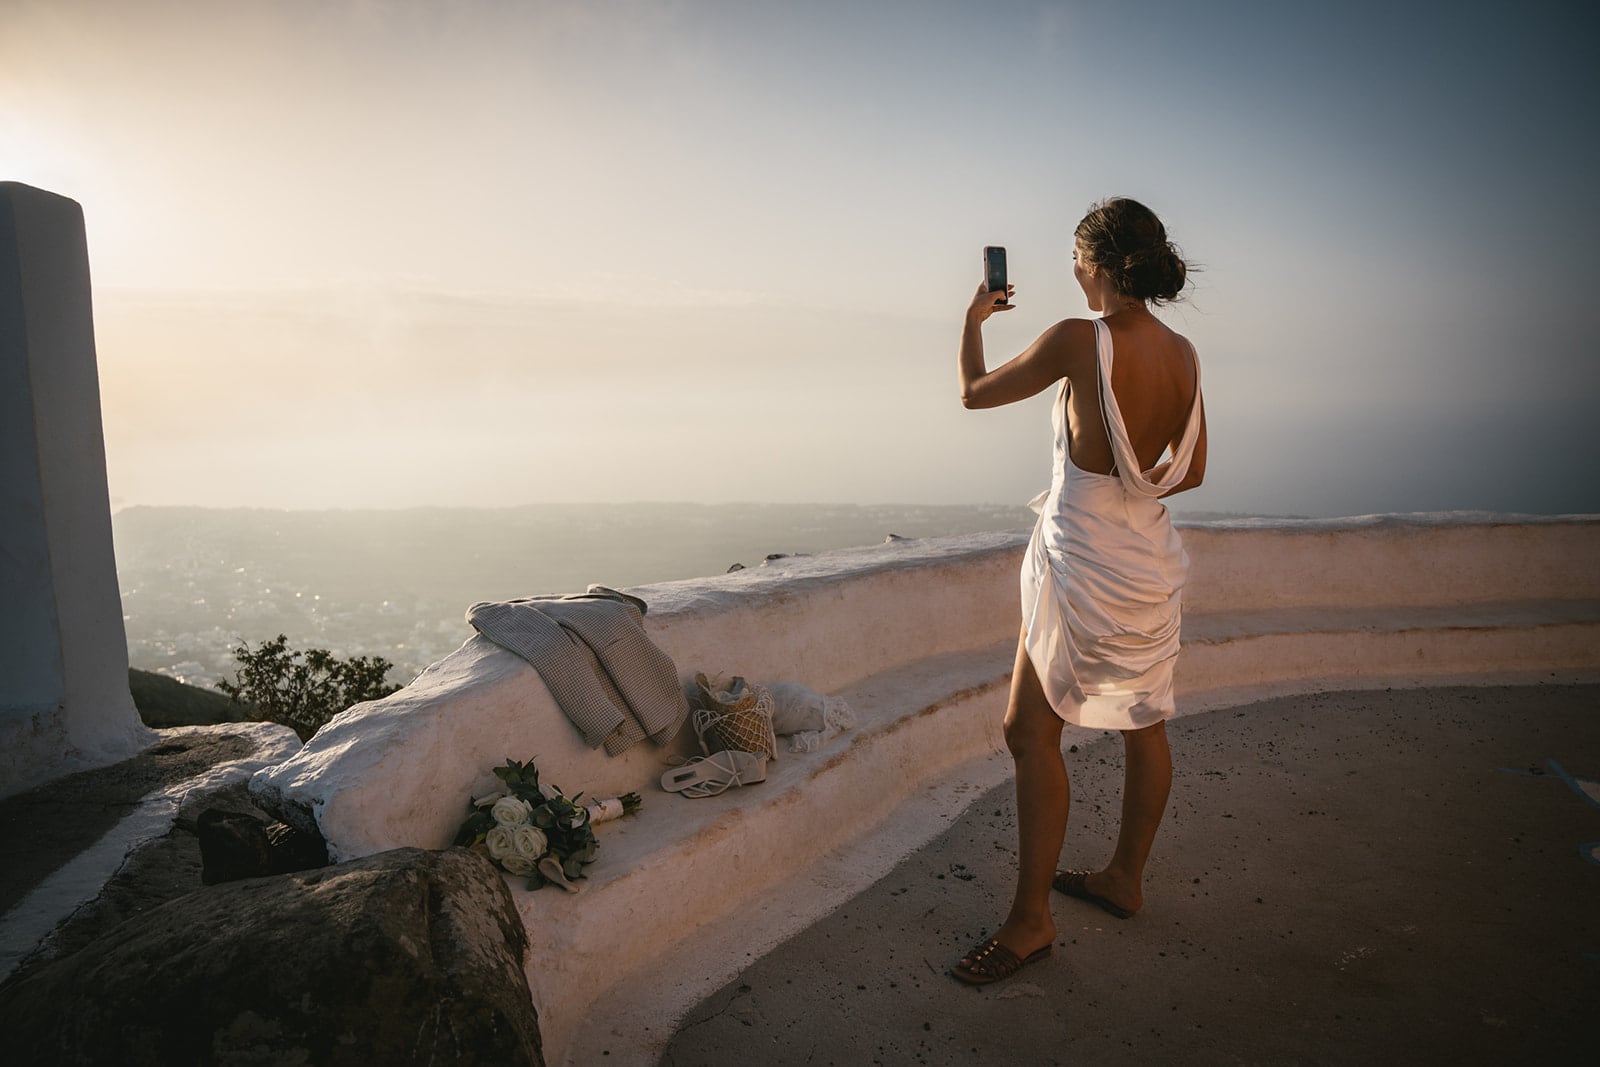 Every step towards their ceremony is a step closer to forever, under Santorini’s sky